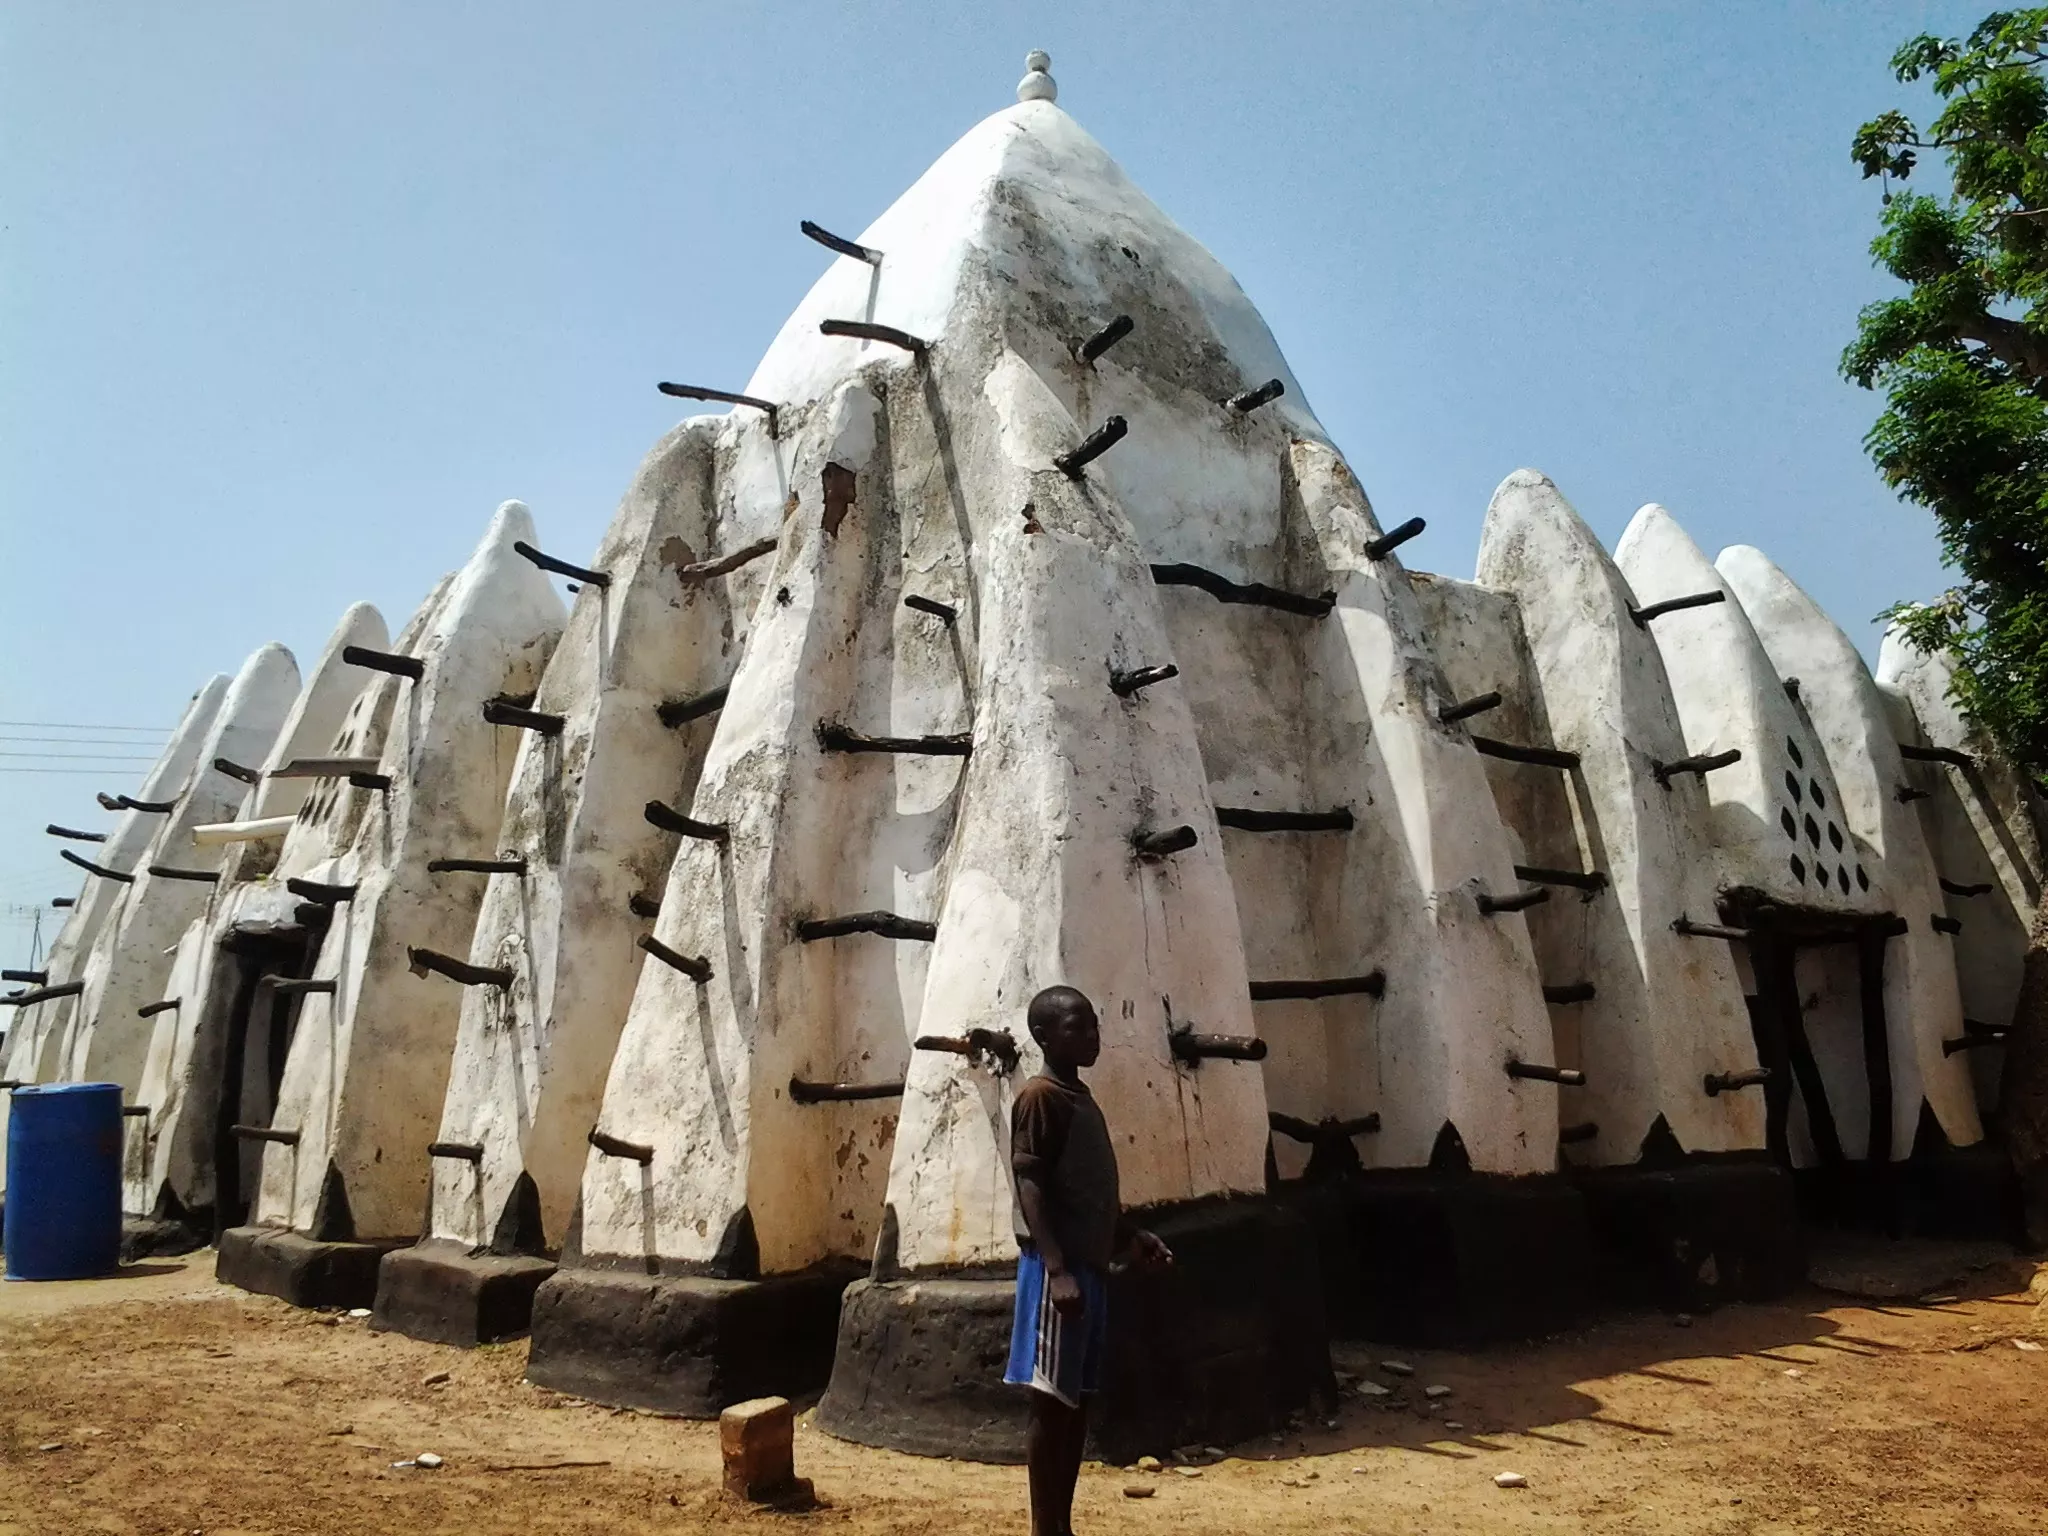 Larabanga Ancient Mosque in Ghana, Africa | Architecture - Rated 0.7